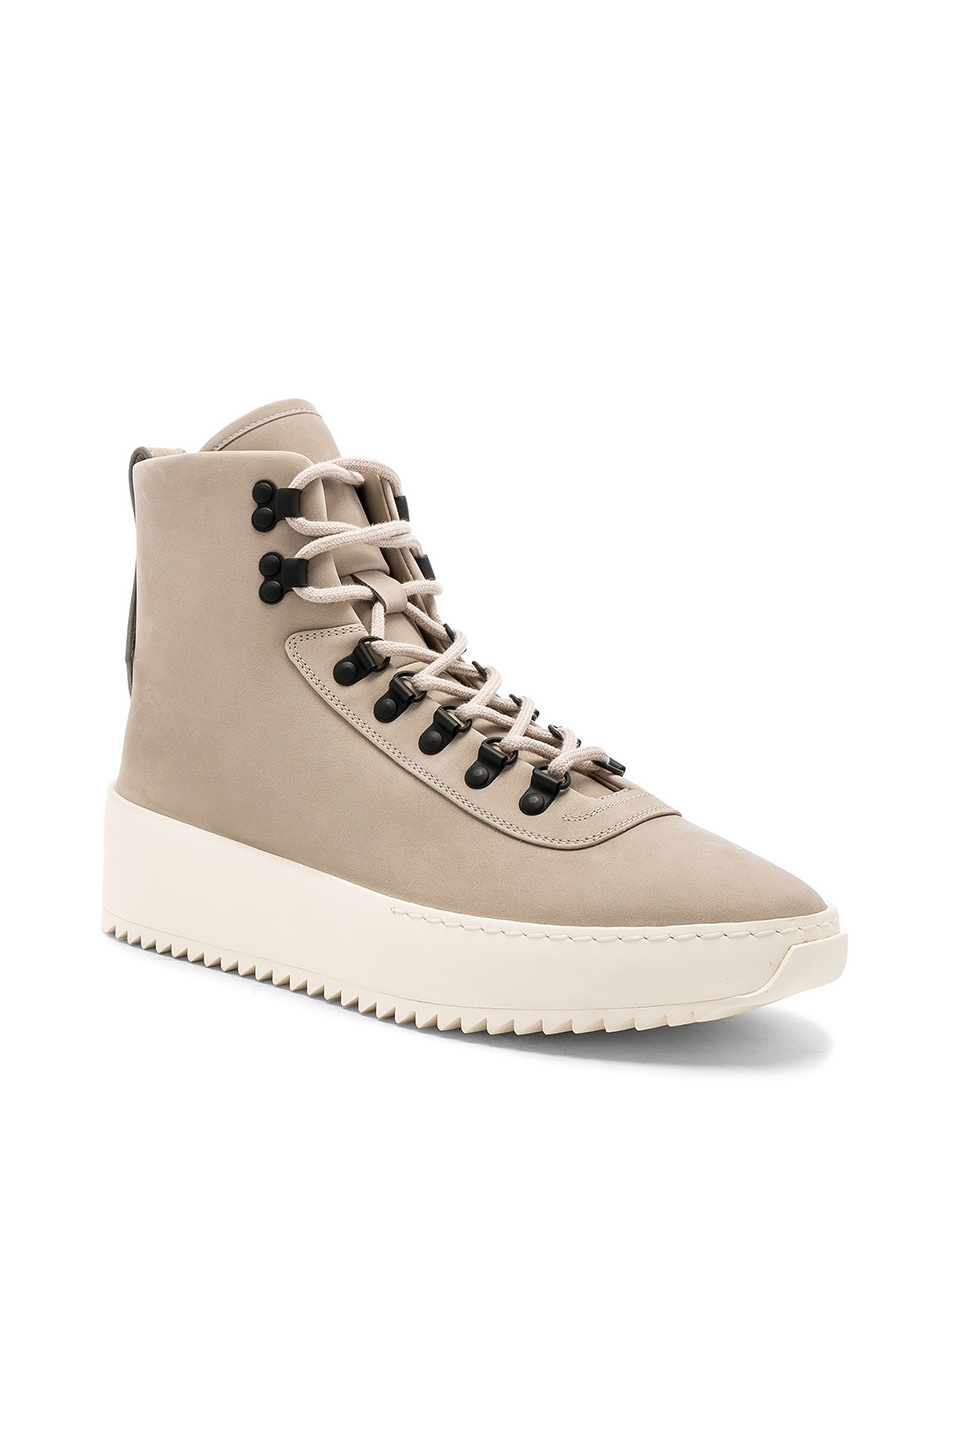 Image 1 of Fear of God Nubuck Leather Hiking Sneakers in Perla